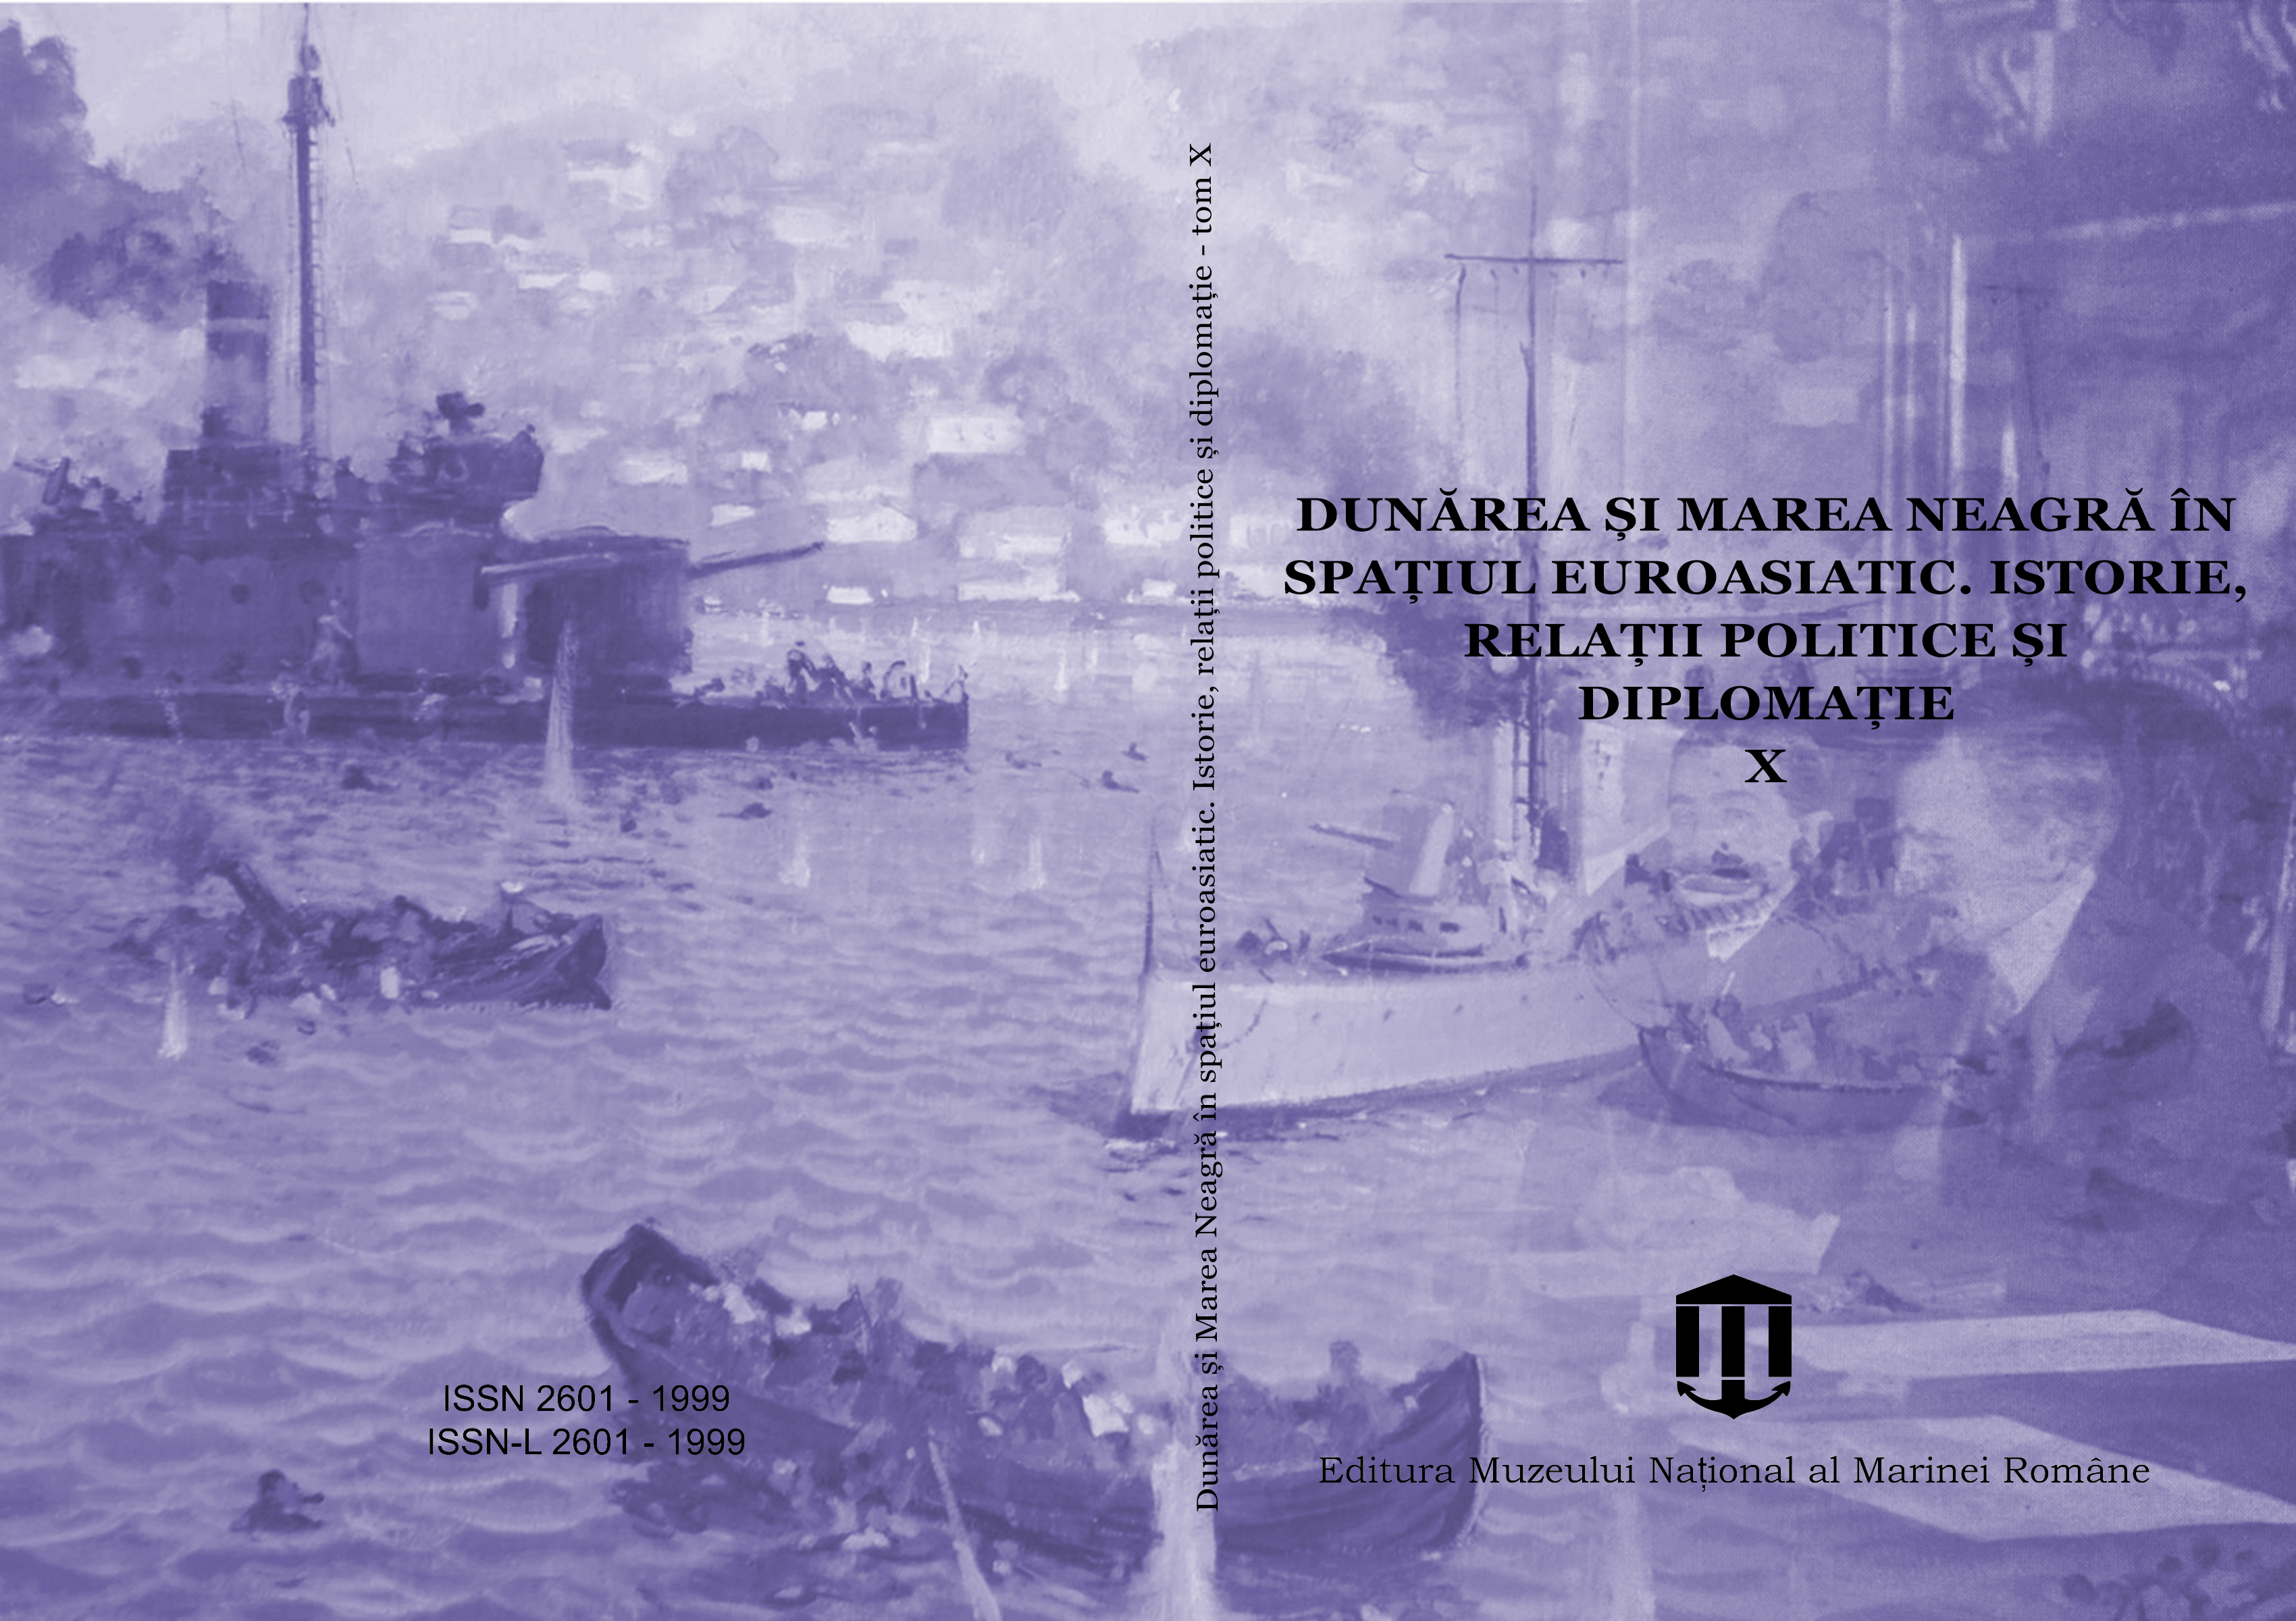 REPORT ON THE ACTIVITIES OF THE ROMANIAN MARITIME SERVICE FROM SEPTEMBER 6 1940 TO NOVEMBER 6 1942 Cover Image